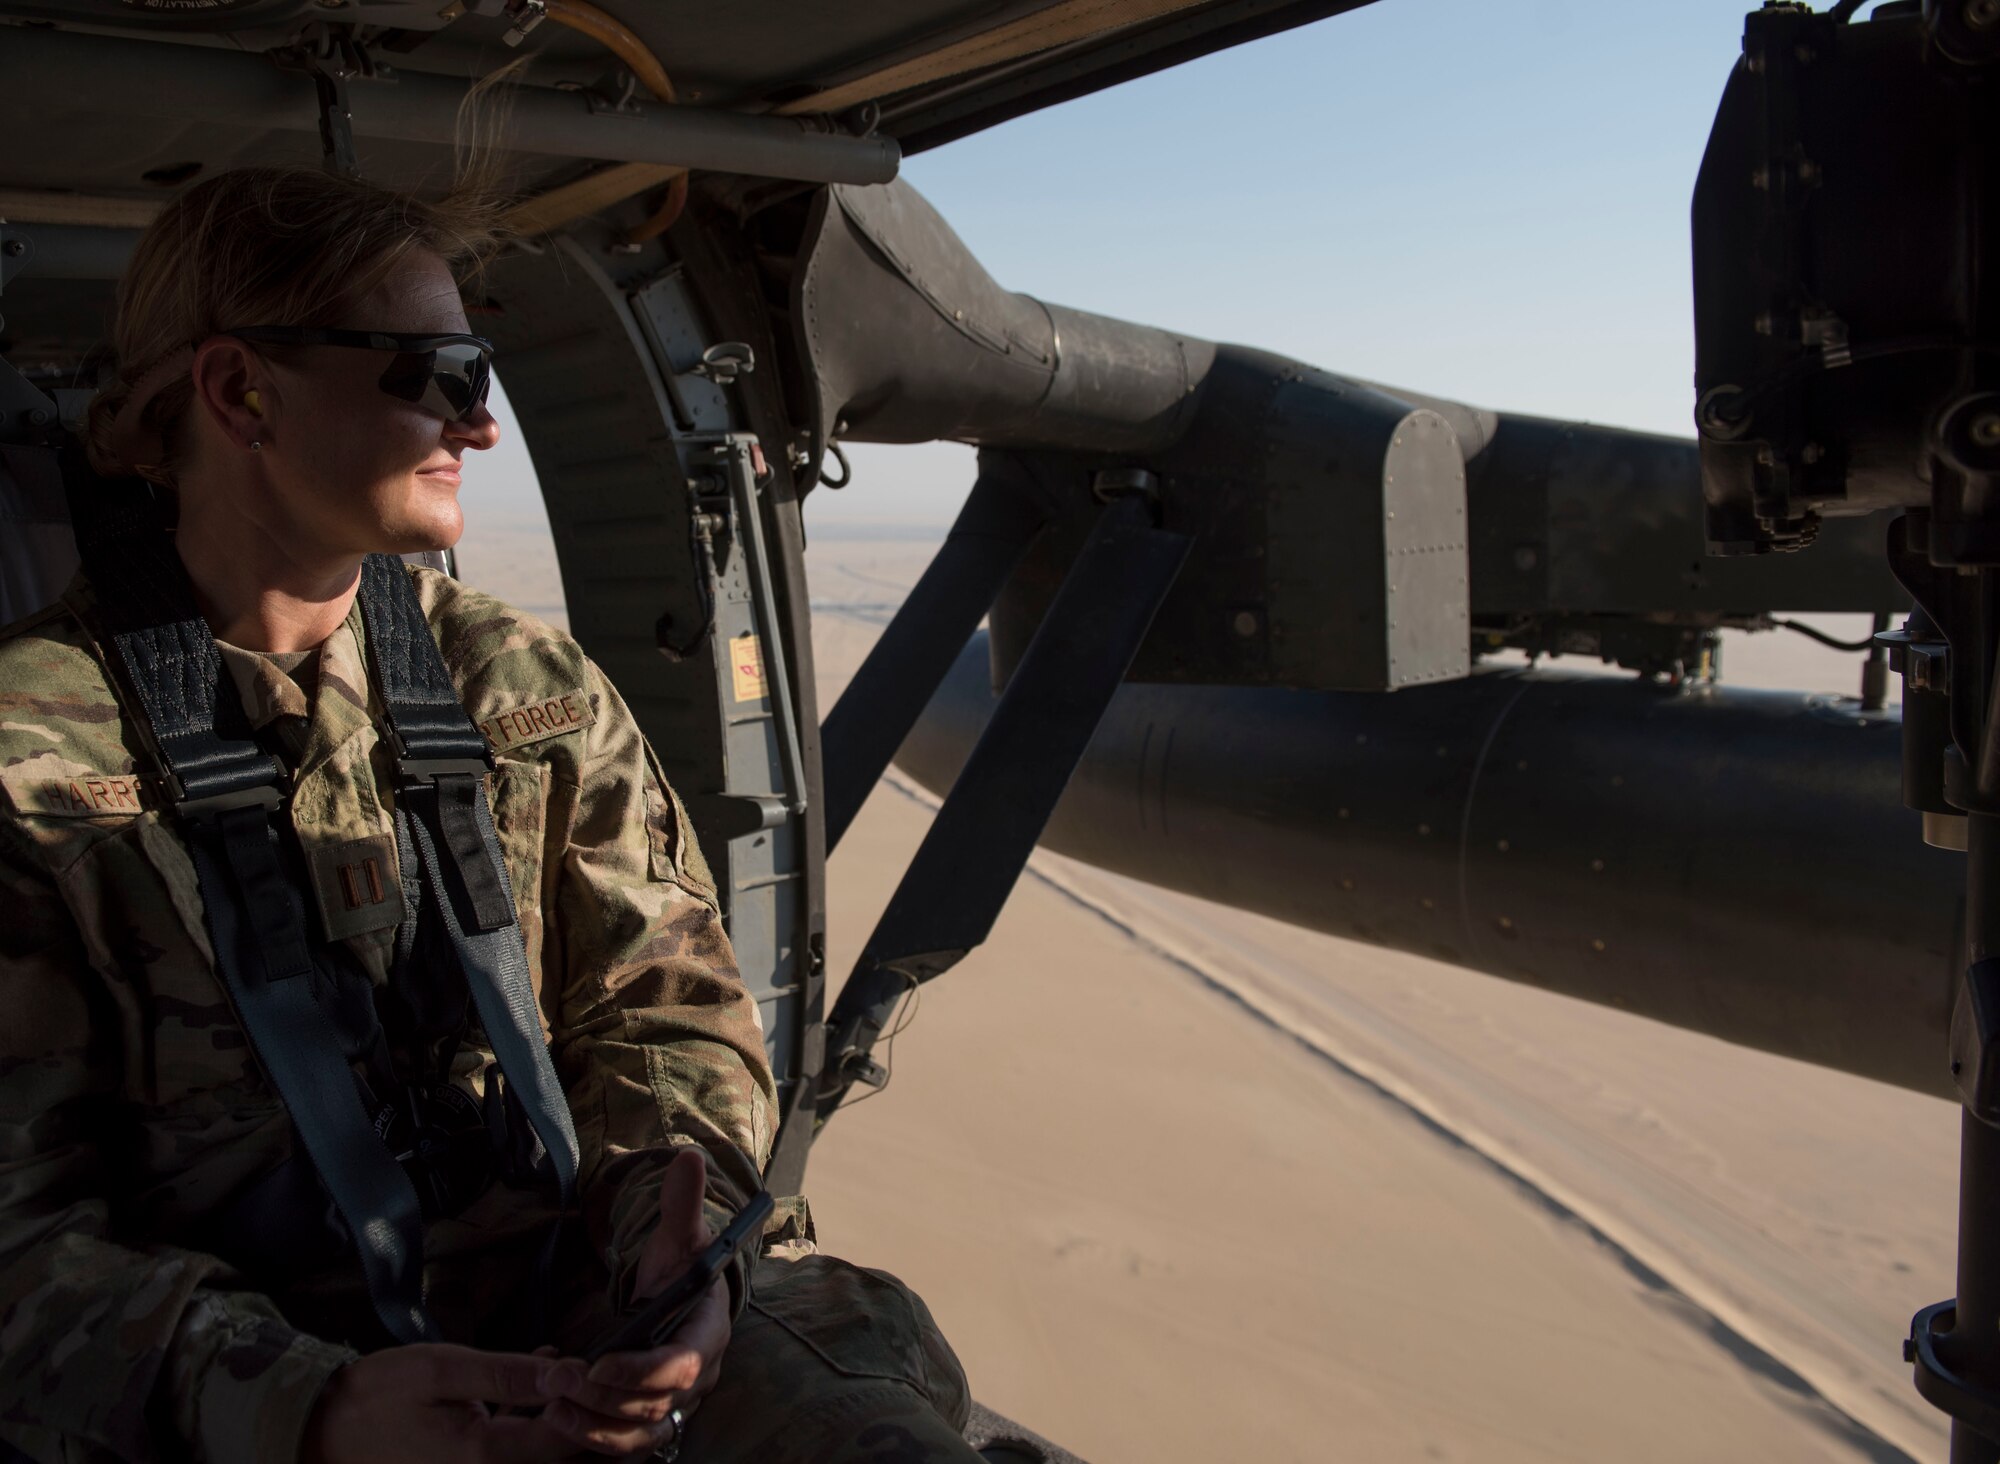 U.S. Air Force Capt. Teresa Harroun, 386th Expeditionary Medical Group chief nurse, looks out of a UH-60 Black Hawk helicopter during a medical evacuation training exercise at Ali Al Salem Air Base, Kuwait, Oct. 27, 2020.